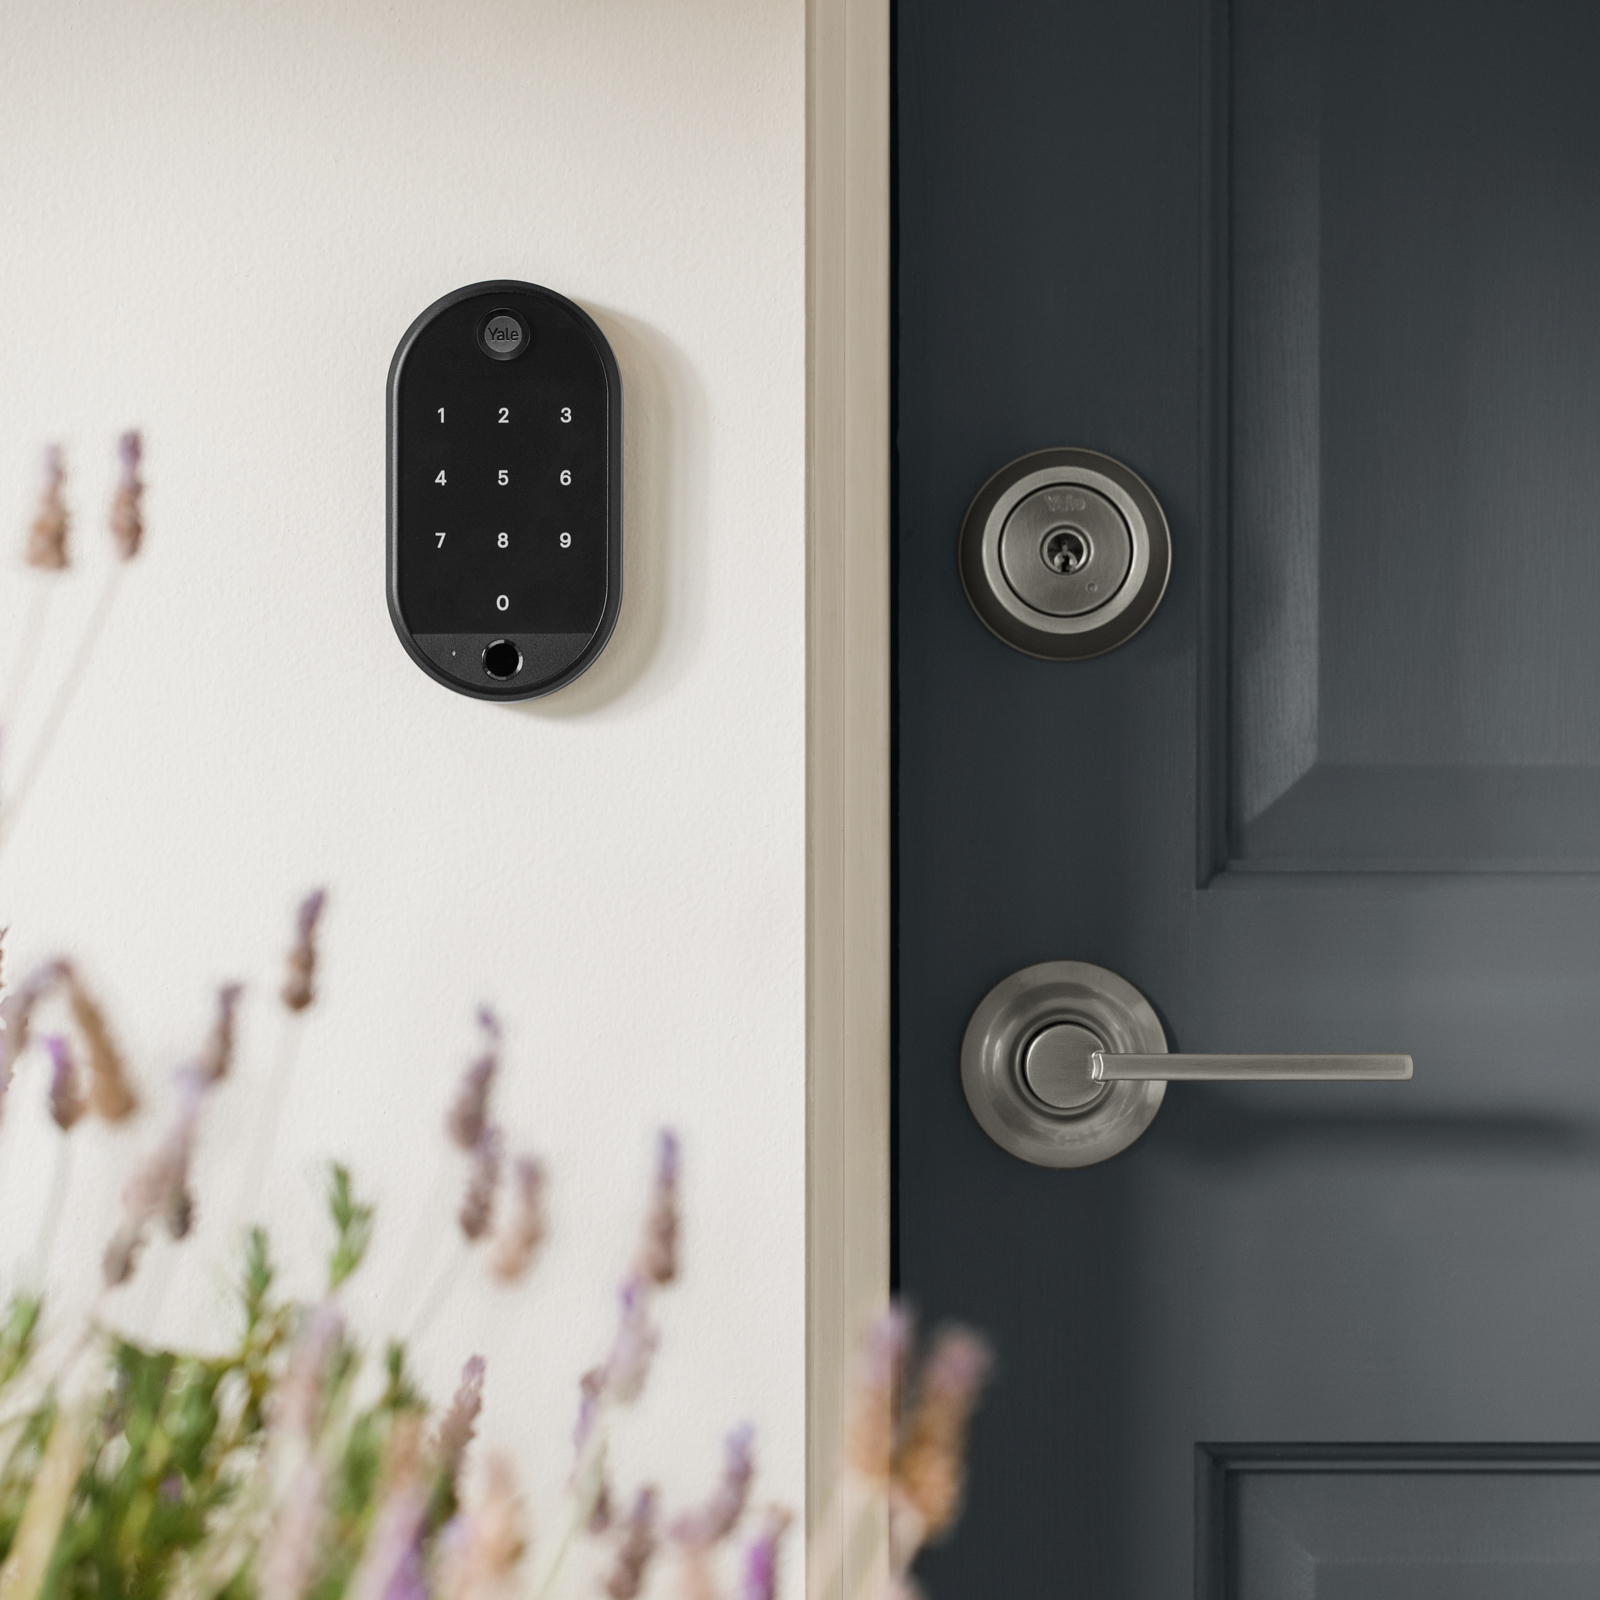 Yale Approach™ Lock with Wi-Fi and Keypad Touch